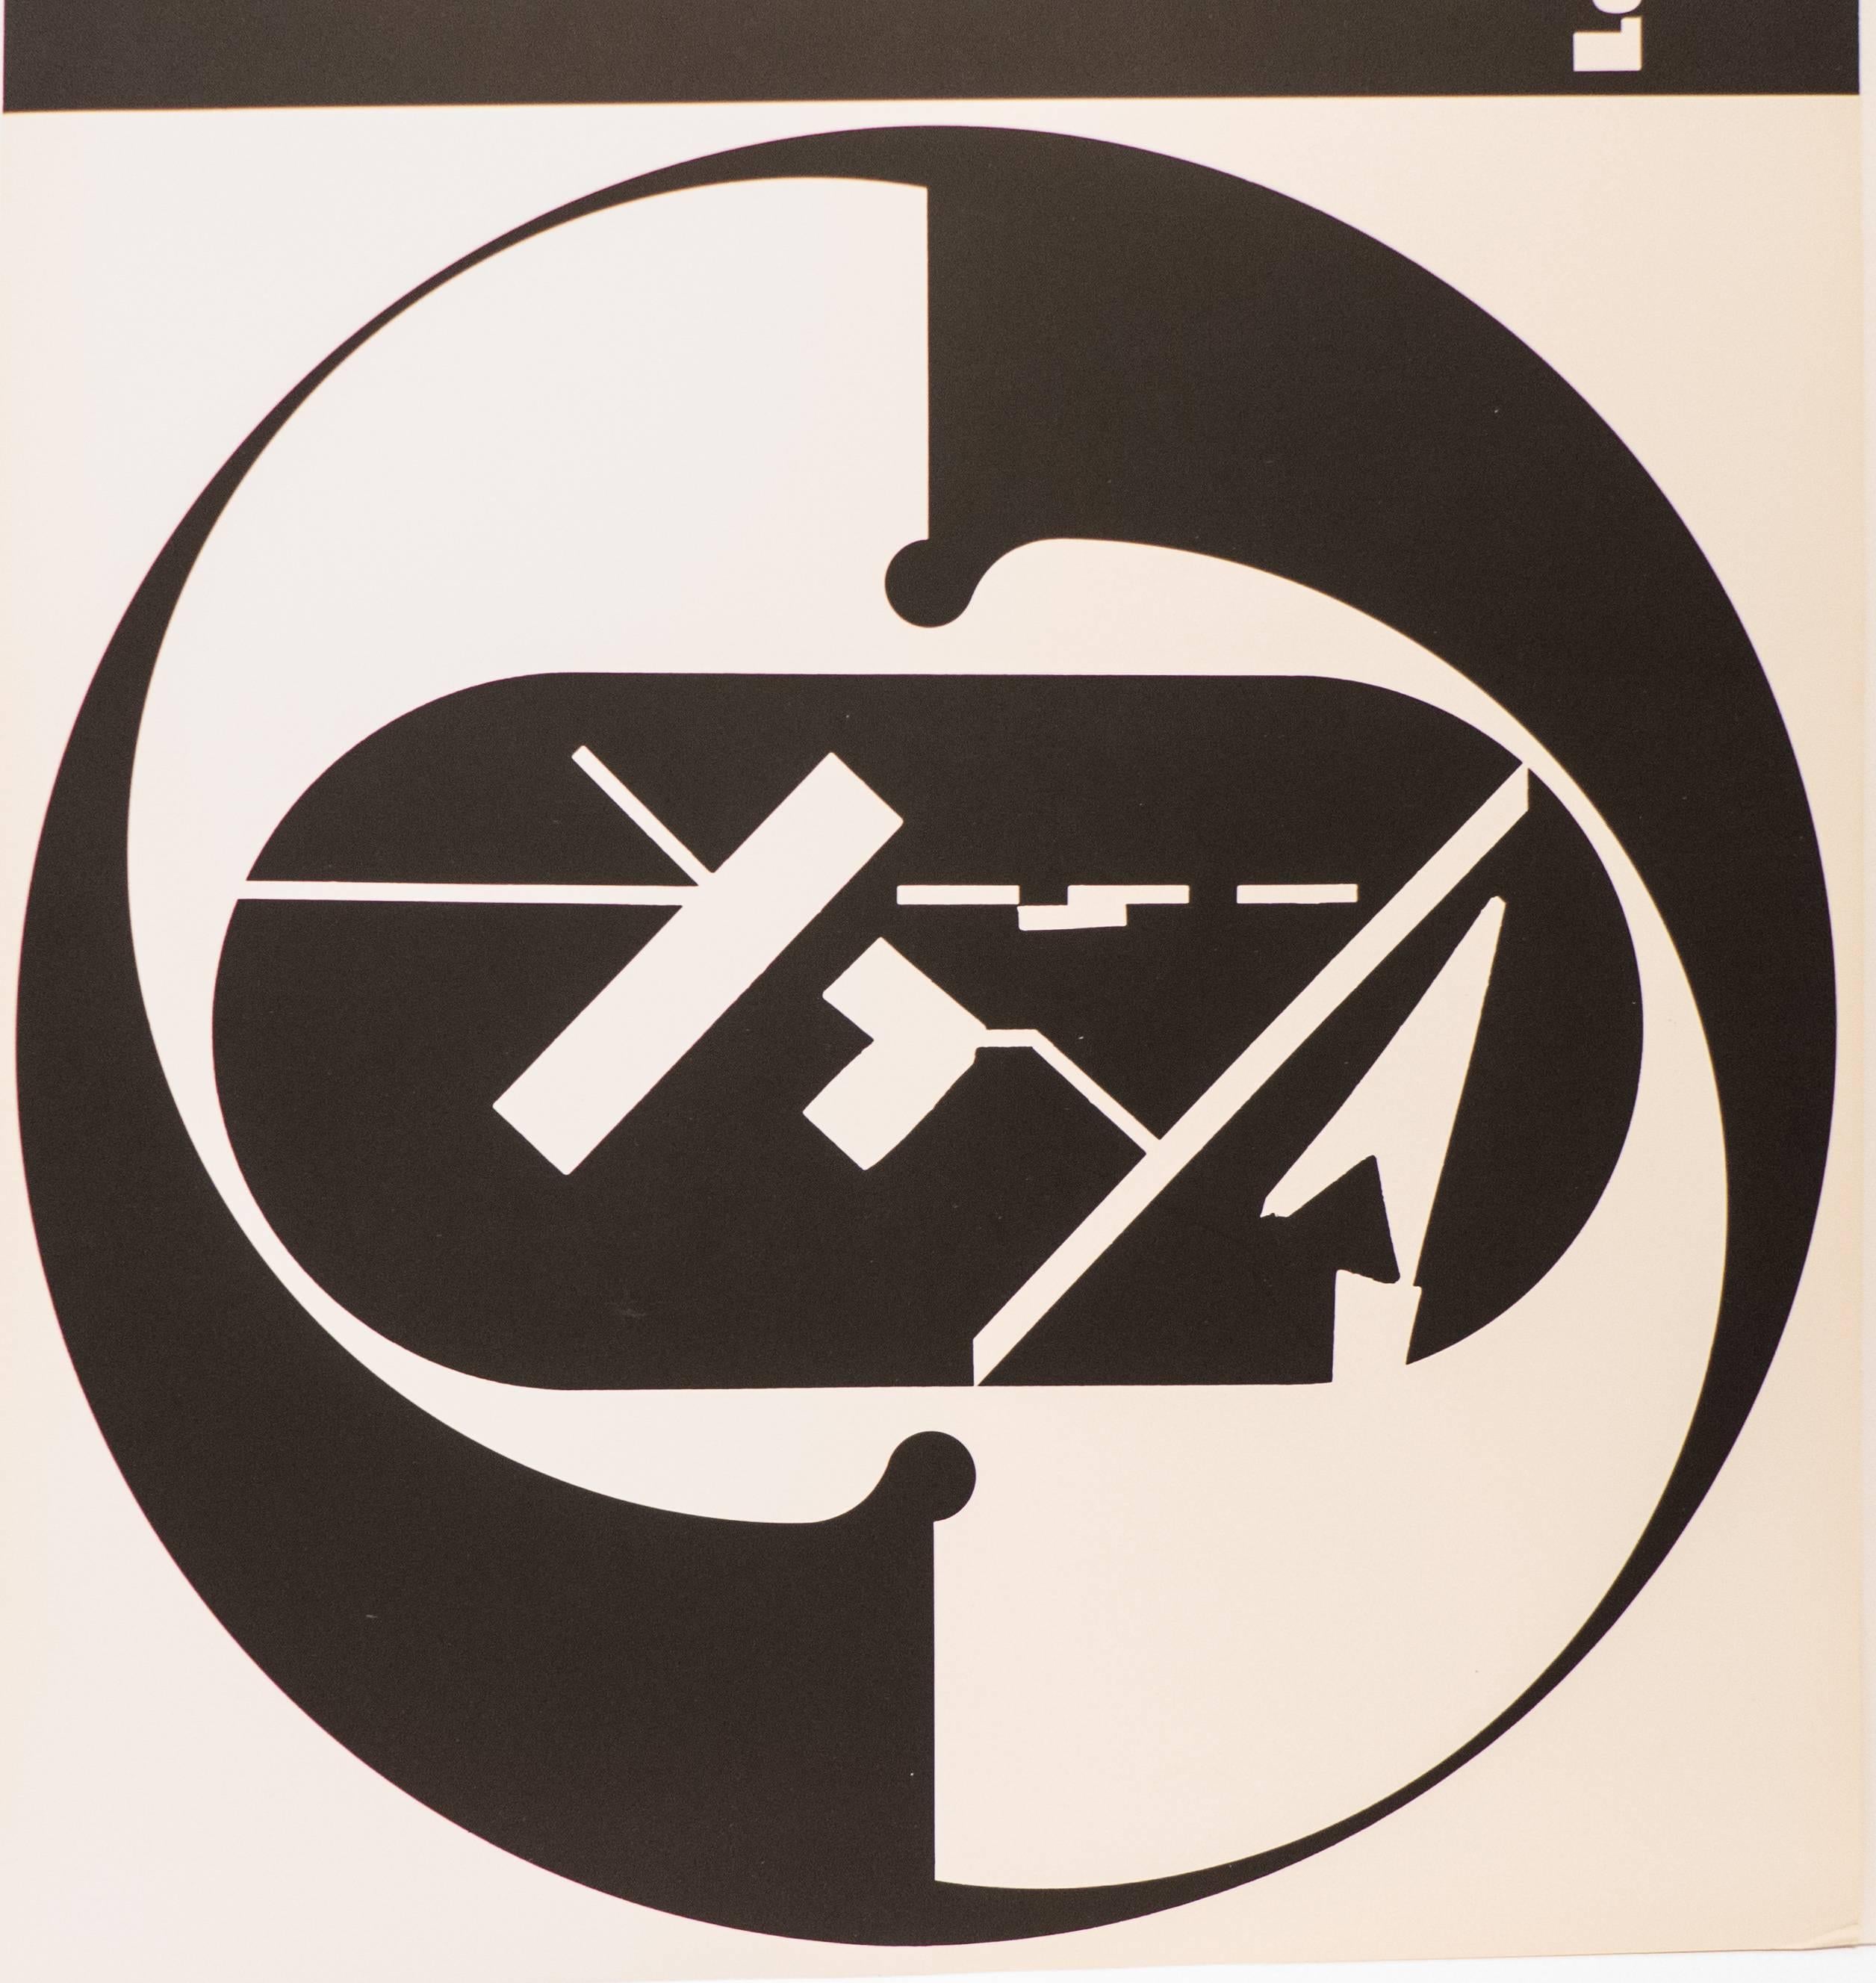 Original poster for "Ladislav Sutnar: Visual Design in Action," an exhibition sponsored by the American Institute of Graphic Arts and held at the Pepsi-Cola Exhibition Gallery in New York City in 1961. The exhibition, in cooperation with